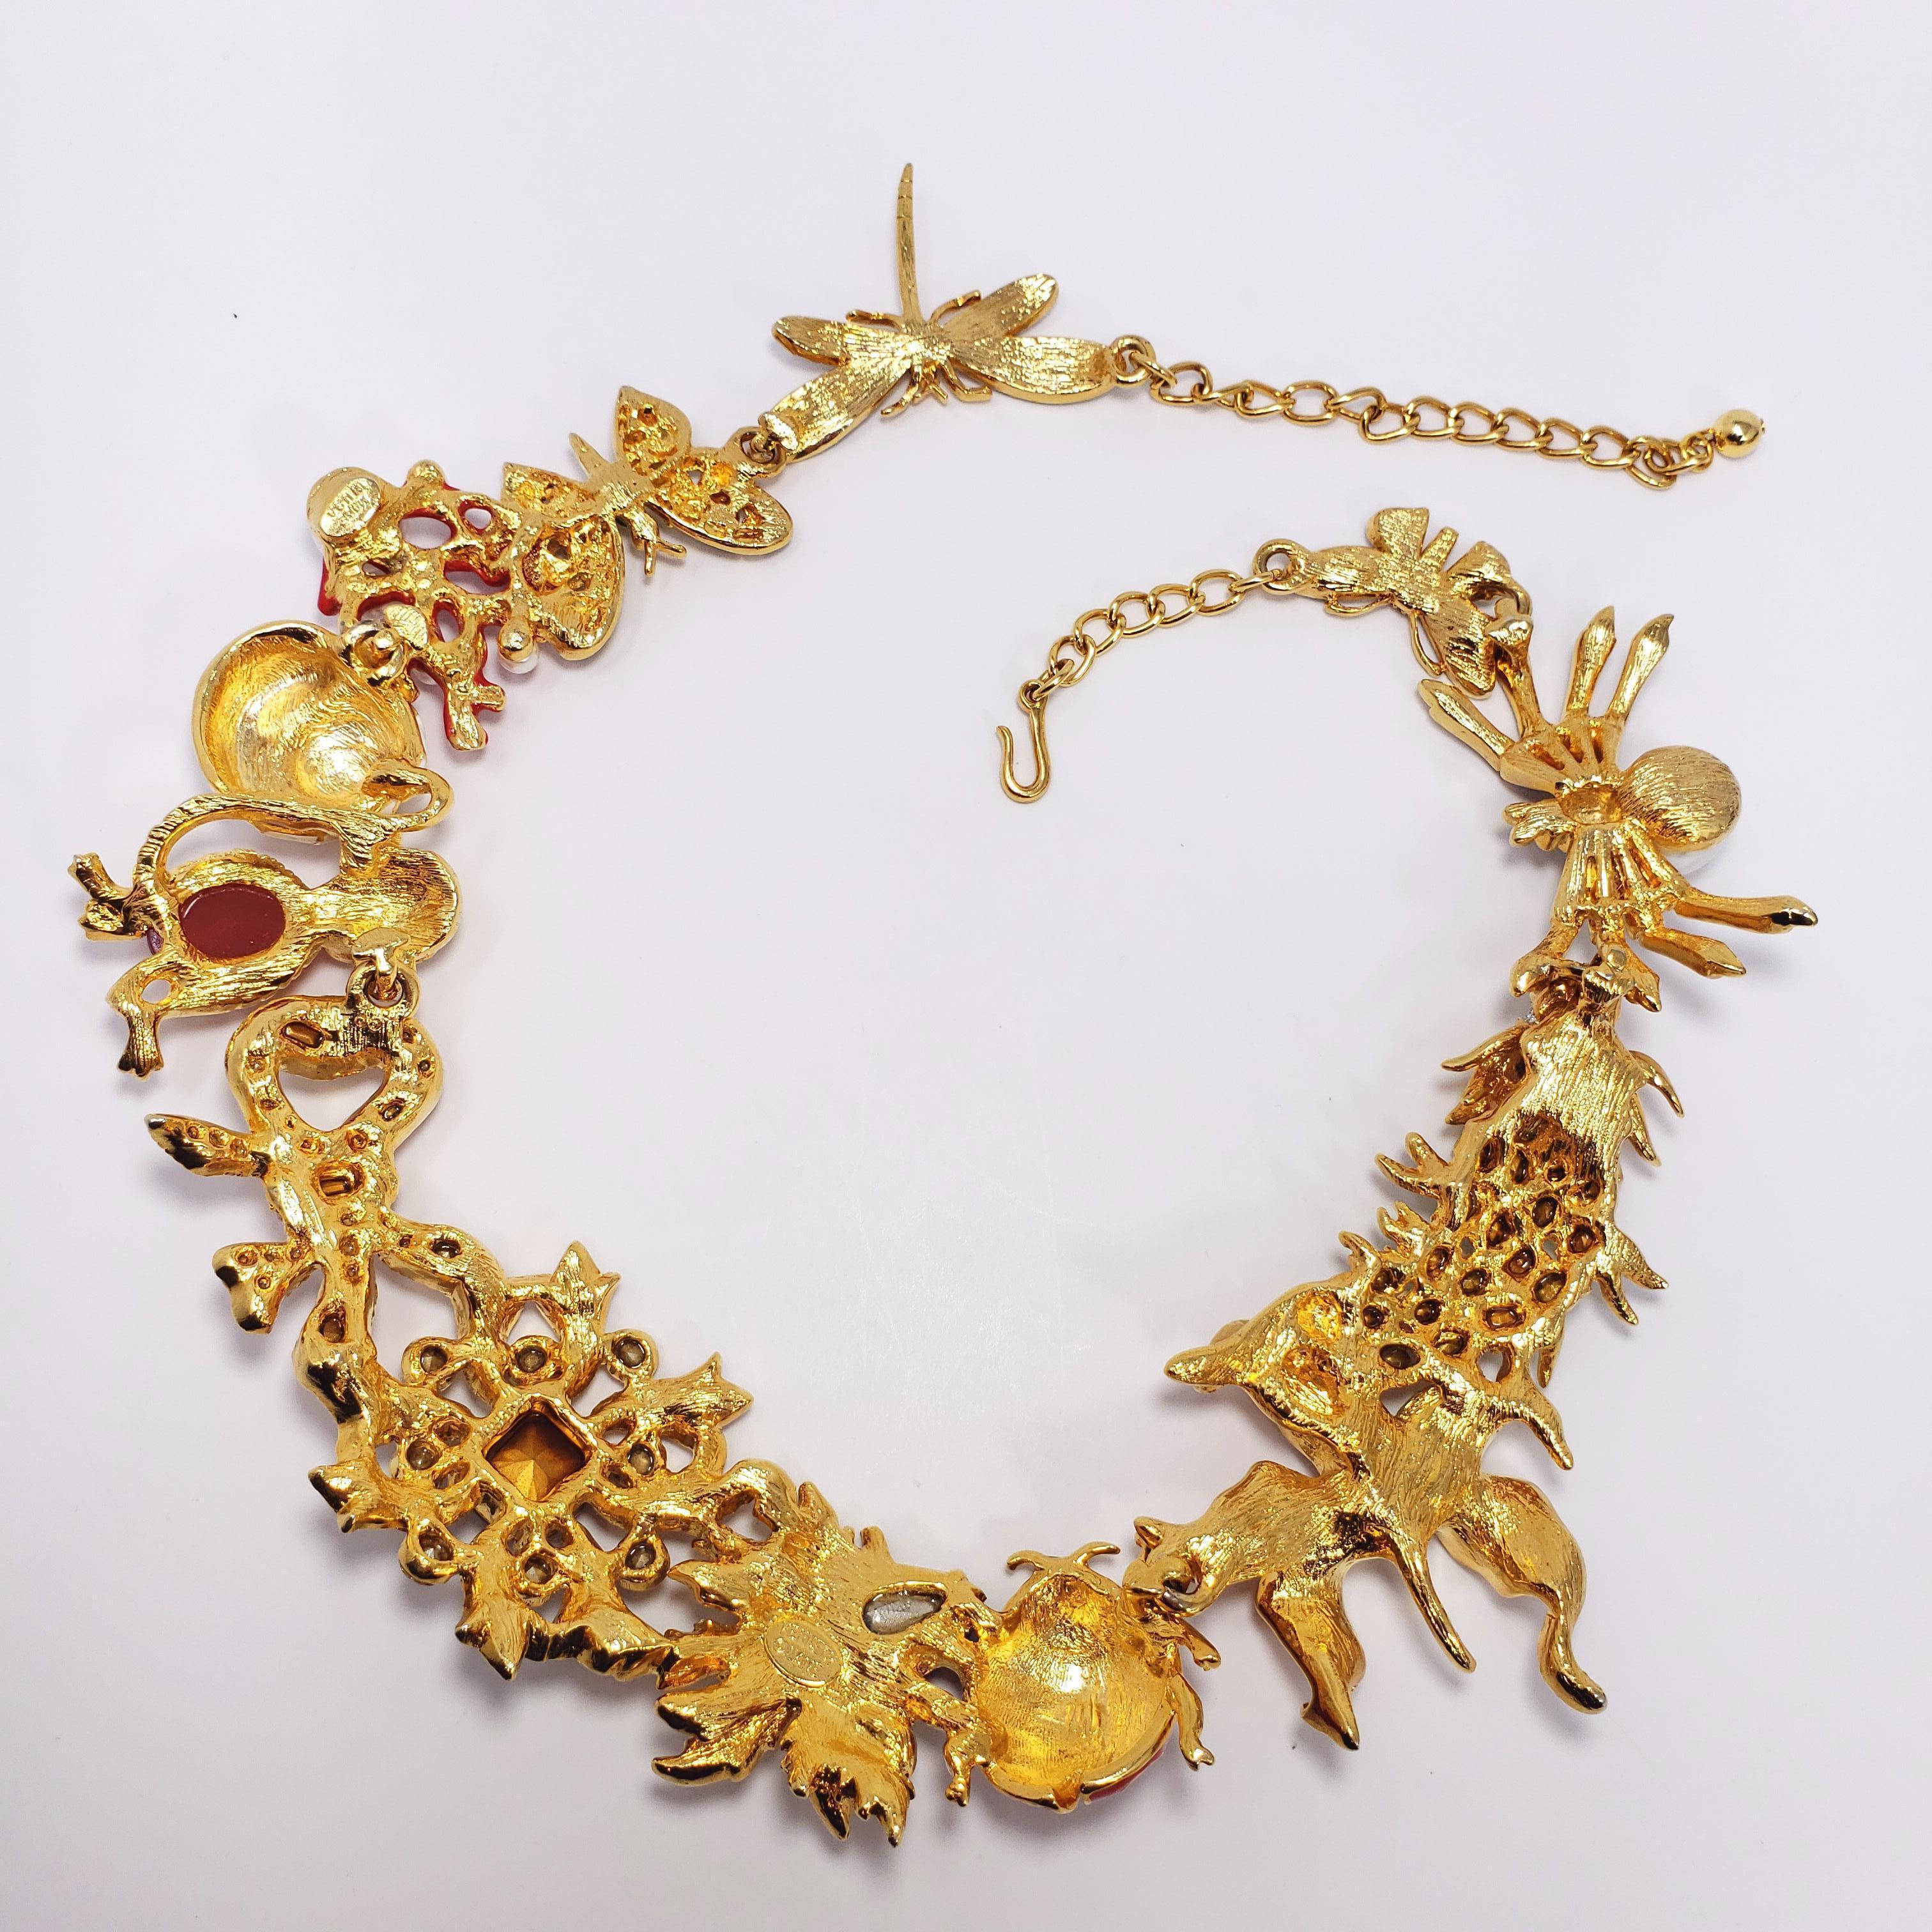 Kenneth Jay Lane Ornate Colorful Crystal Kaleidoscope Collar Necklace in Gold 4